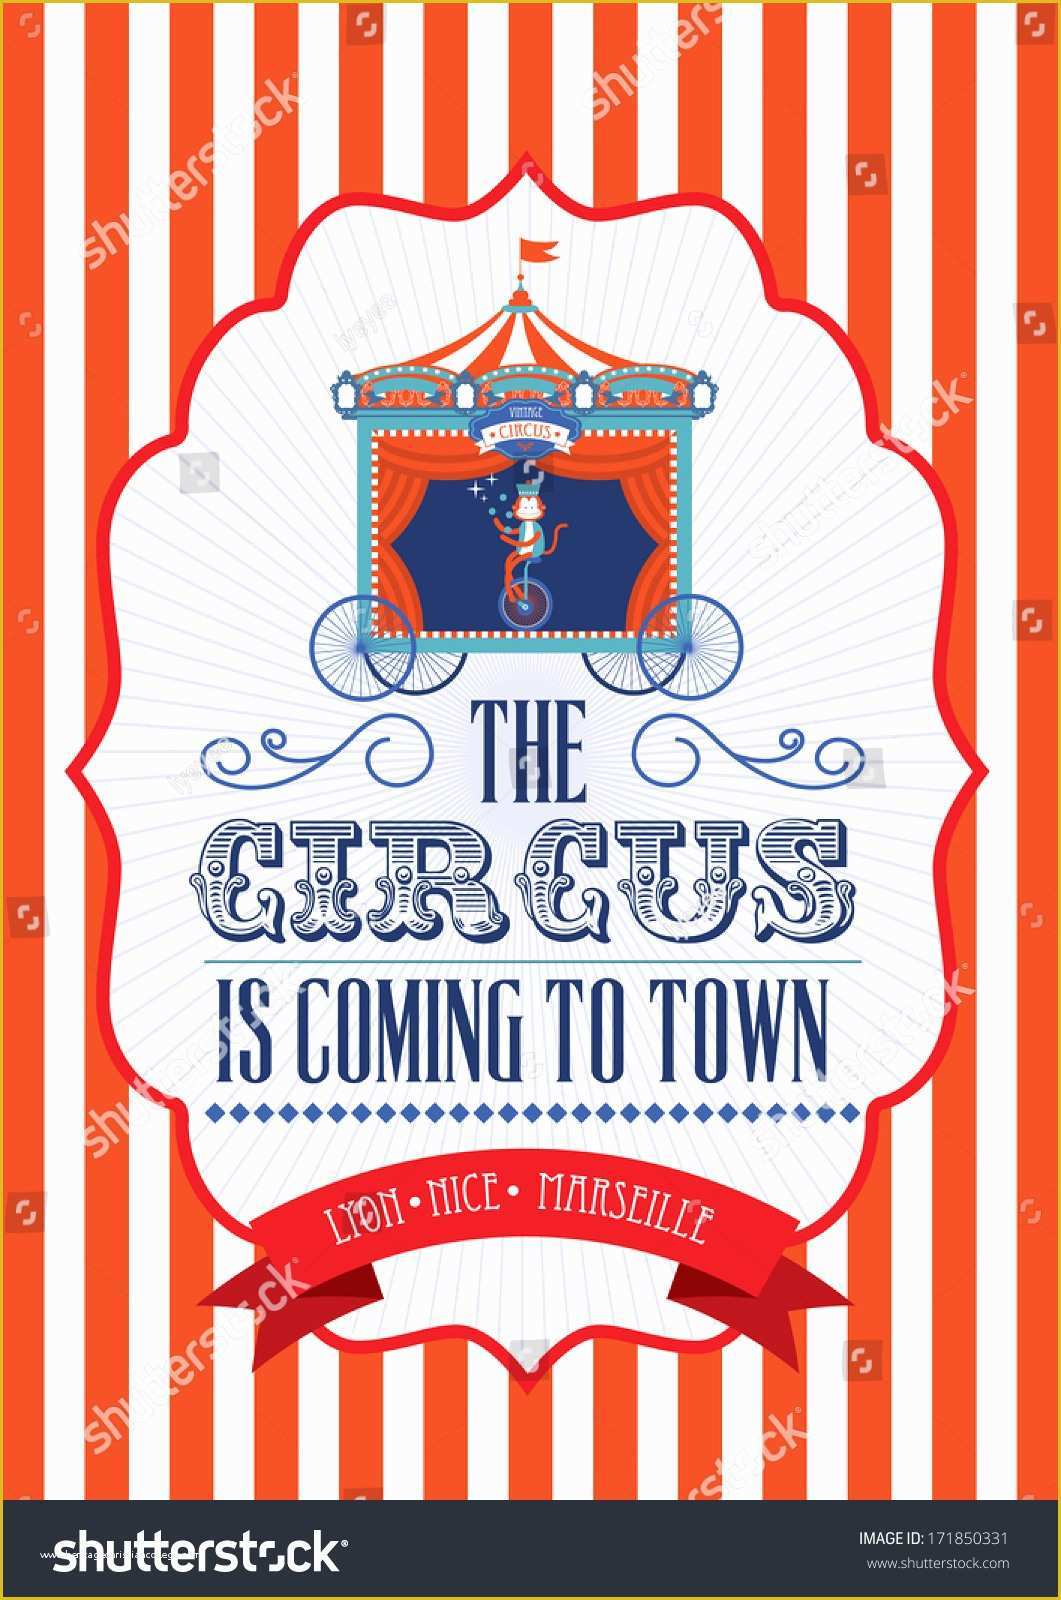 Circus Poster Template Free Download Of Vintage Fun Faircarnivalcircus Poster Template